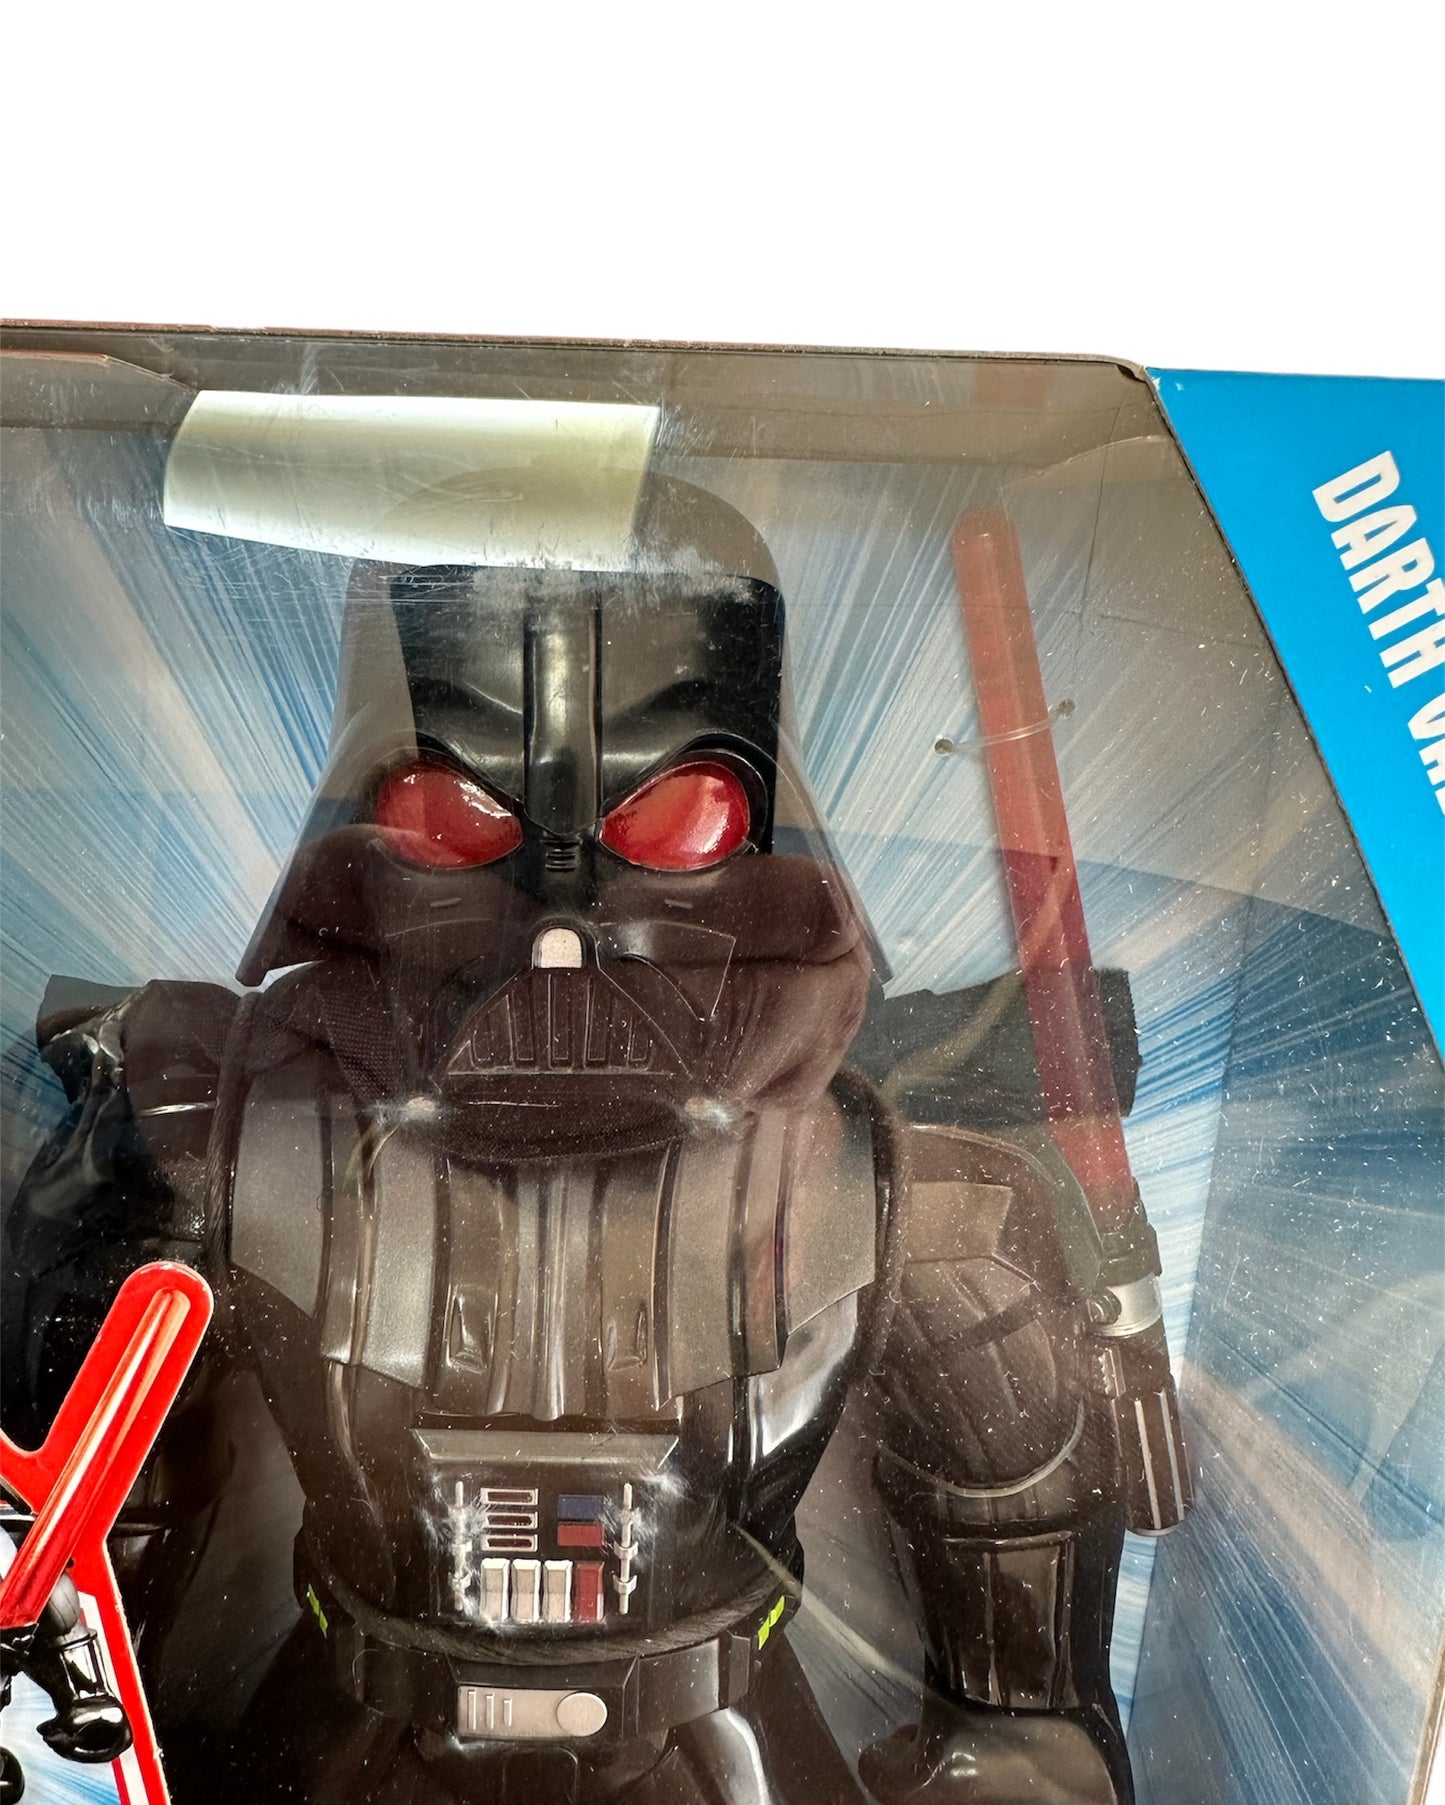 Star Wars 2018 Galactic Heroes Mega Mighties Darth Vader 10 Inch Action Figure - Brand New Factory Sealed